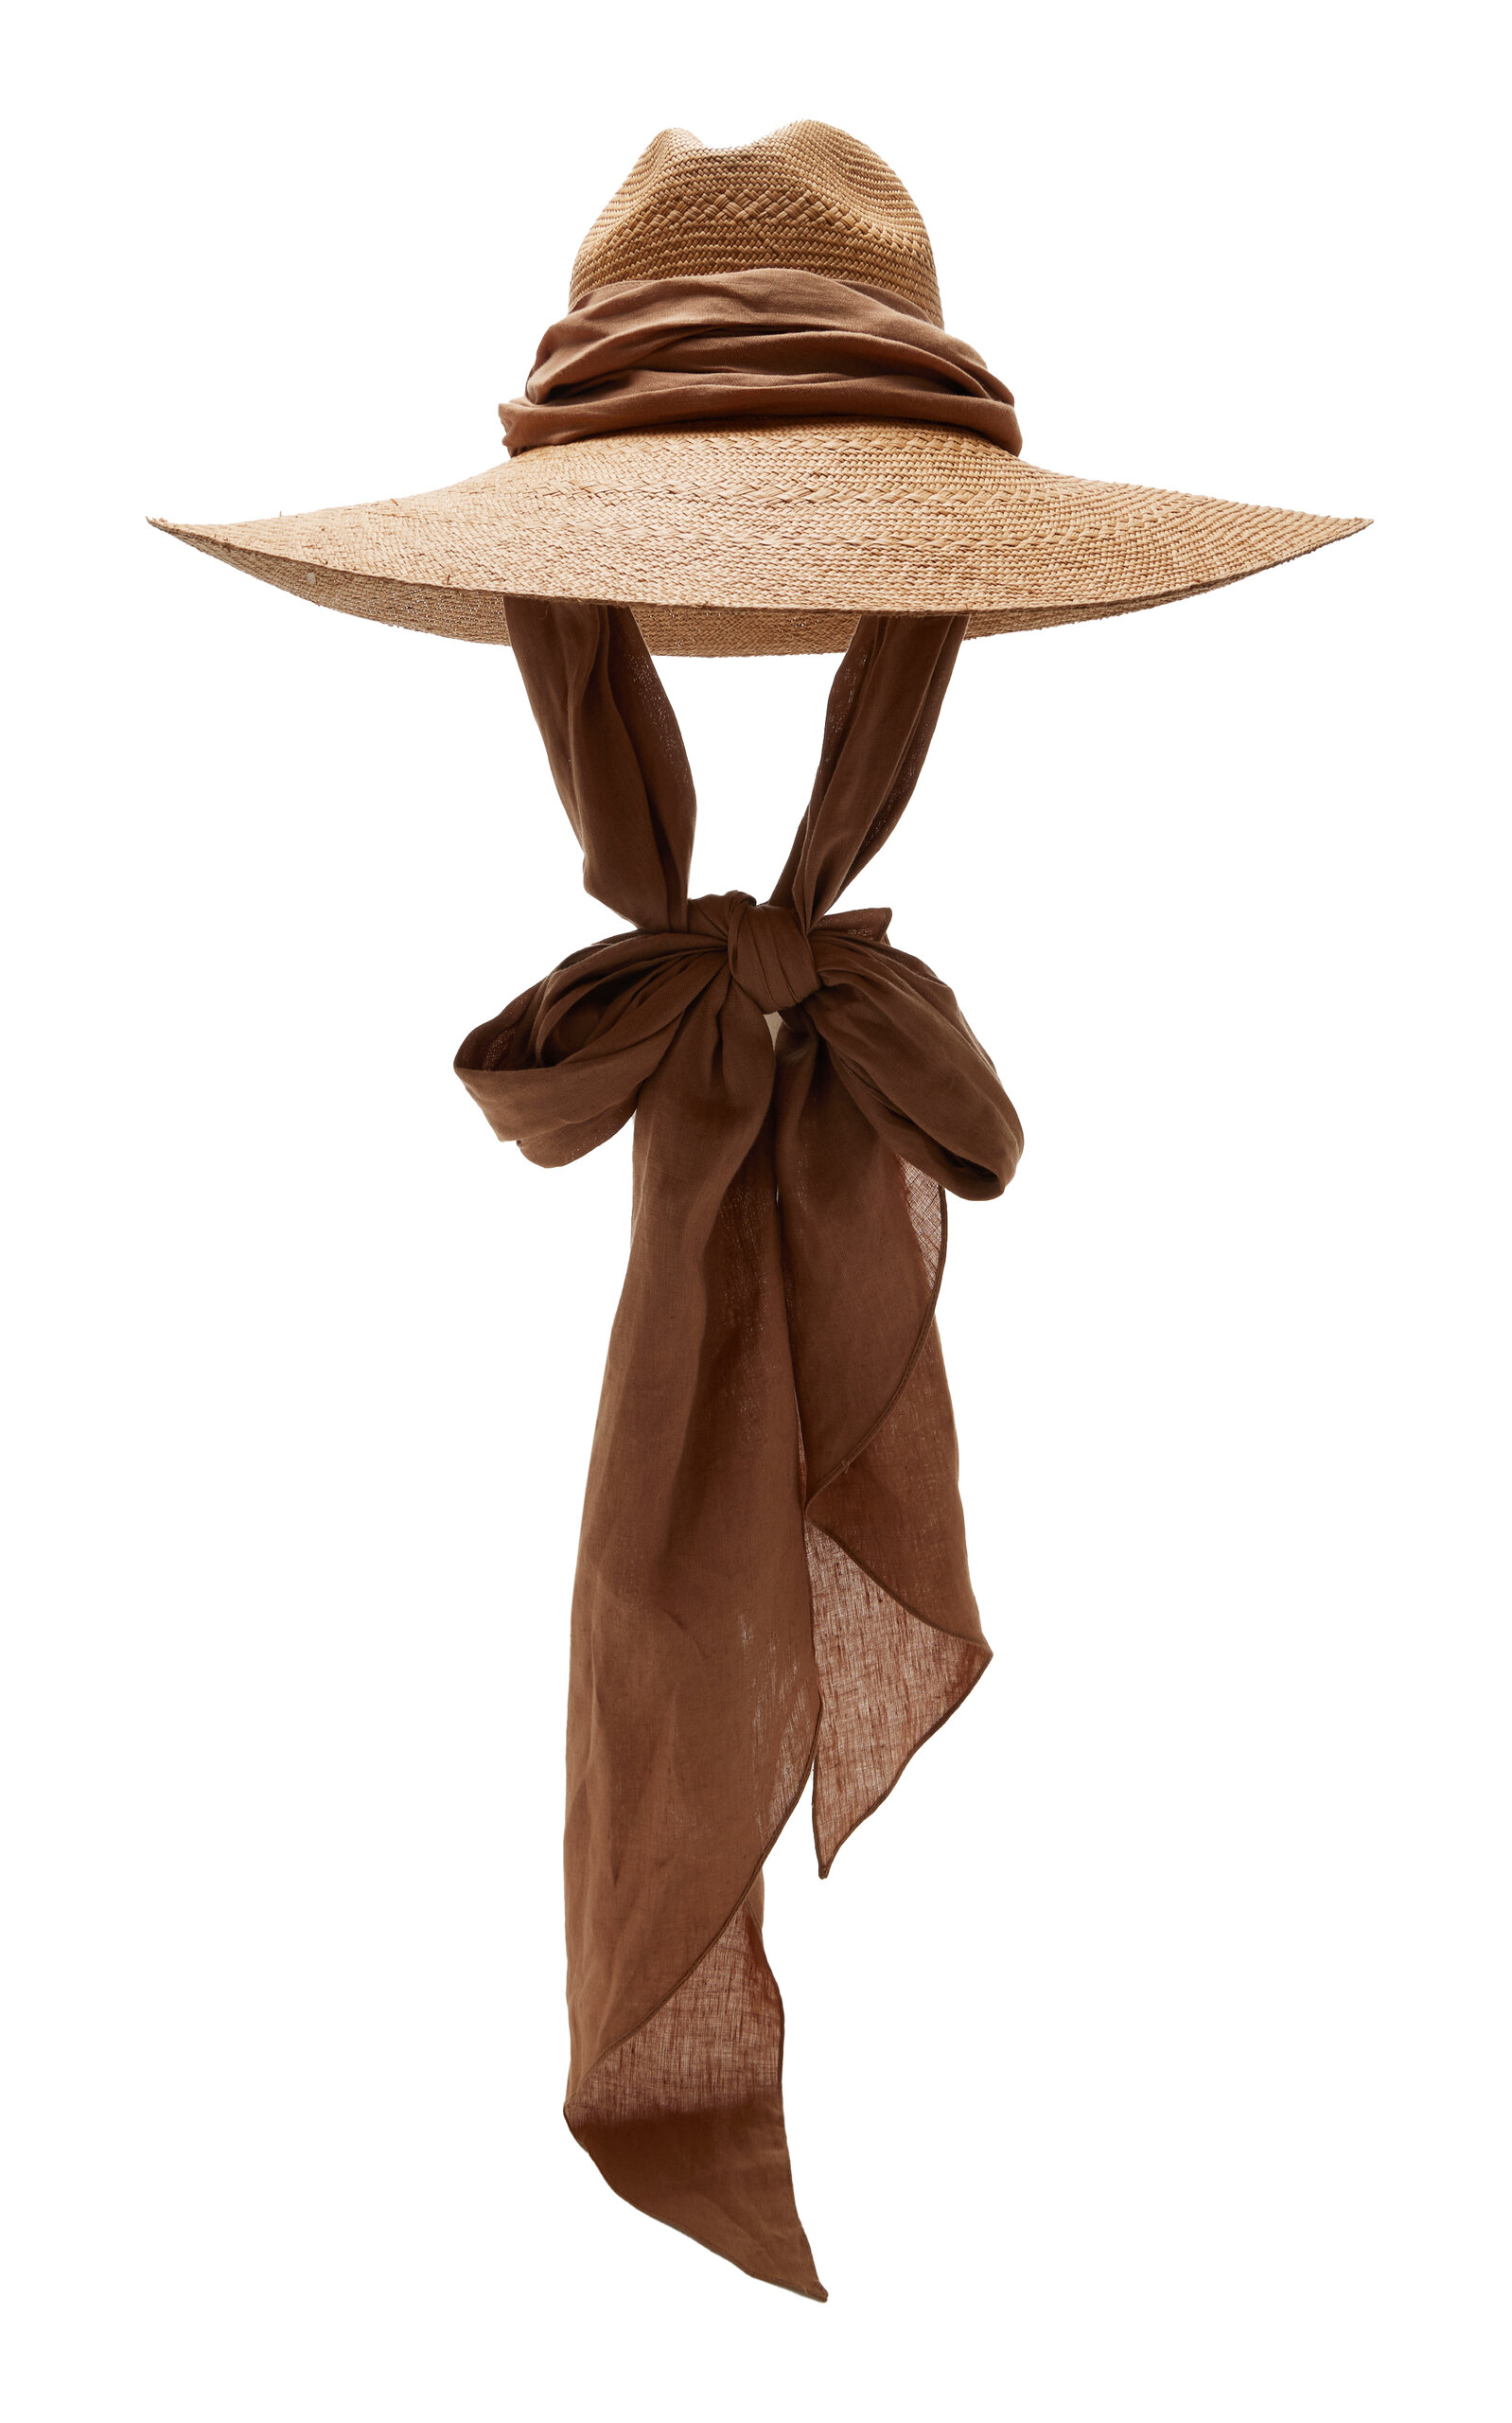 Johanna Ortiz Scarf-detailed Woven Palm Hat In Neutral